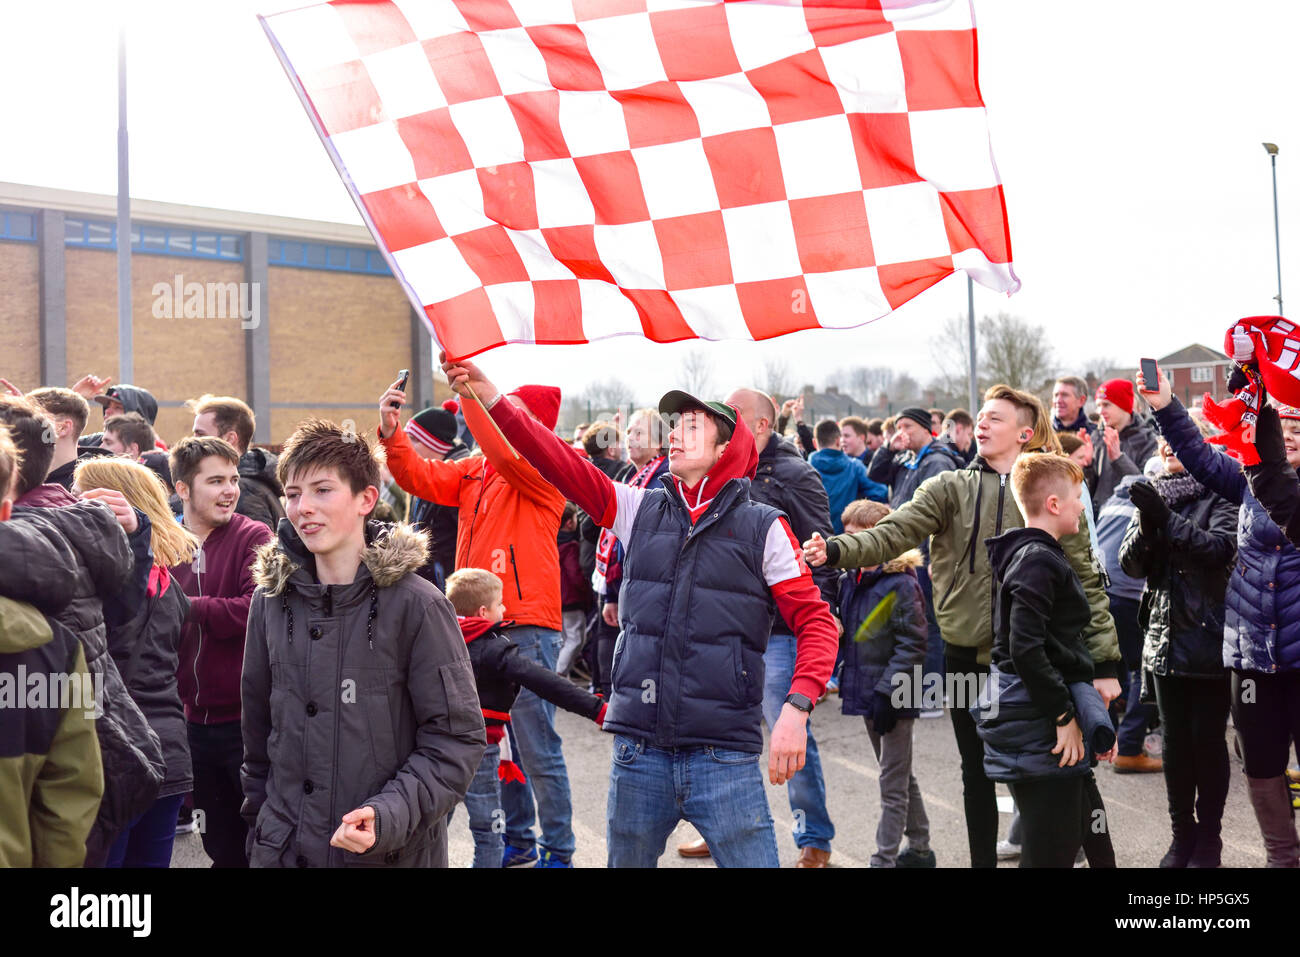 Lincoln, UK. 18th Feb, 2017. Non-league Lincoln city FC supporters celebrate shock win over Premier League club Burnley and a place in the FA Cup quarter-finals. Fans celebrate outside Sincil bank stadium home of the Imps, after watching the game via large screen TV. Credit: Ian Francis/Alamy Live News Stock Photo